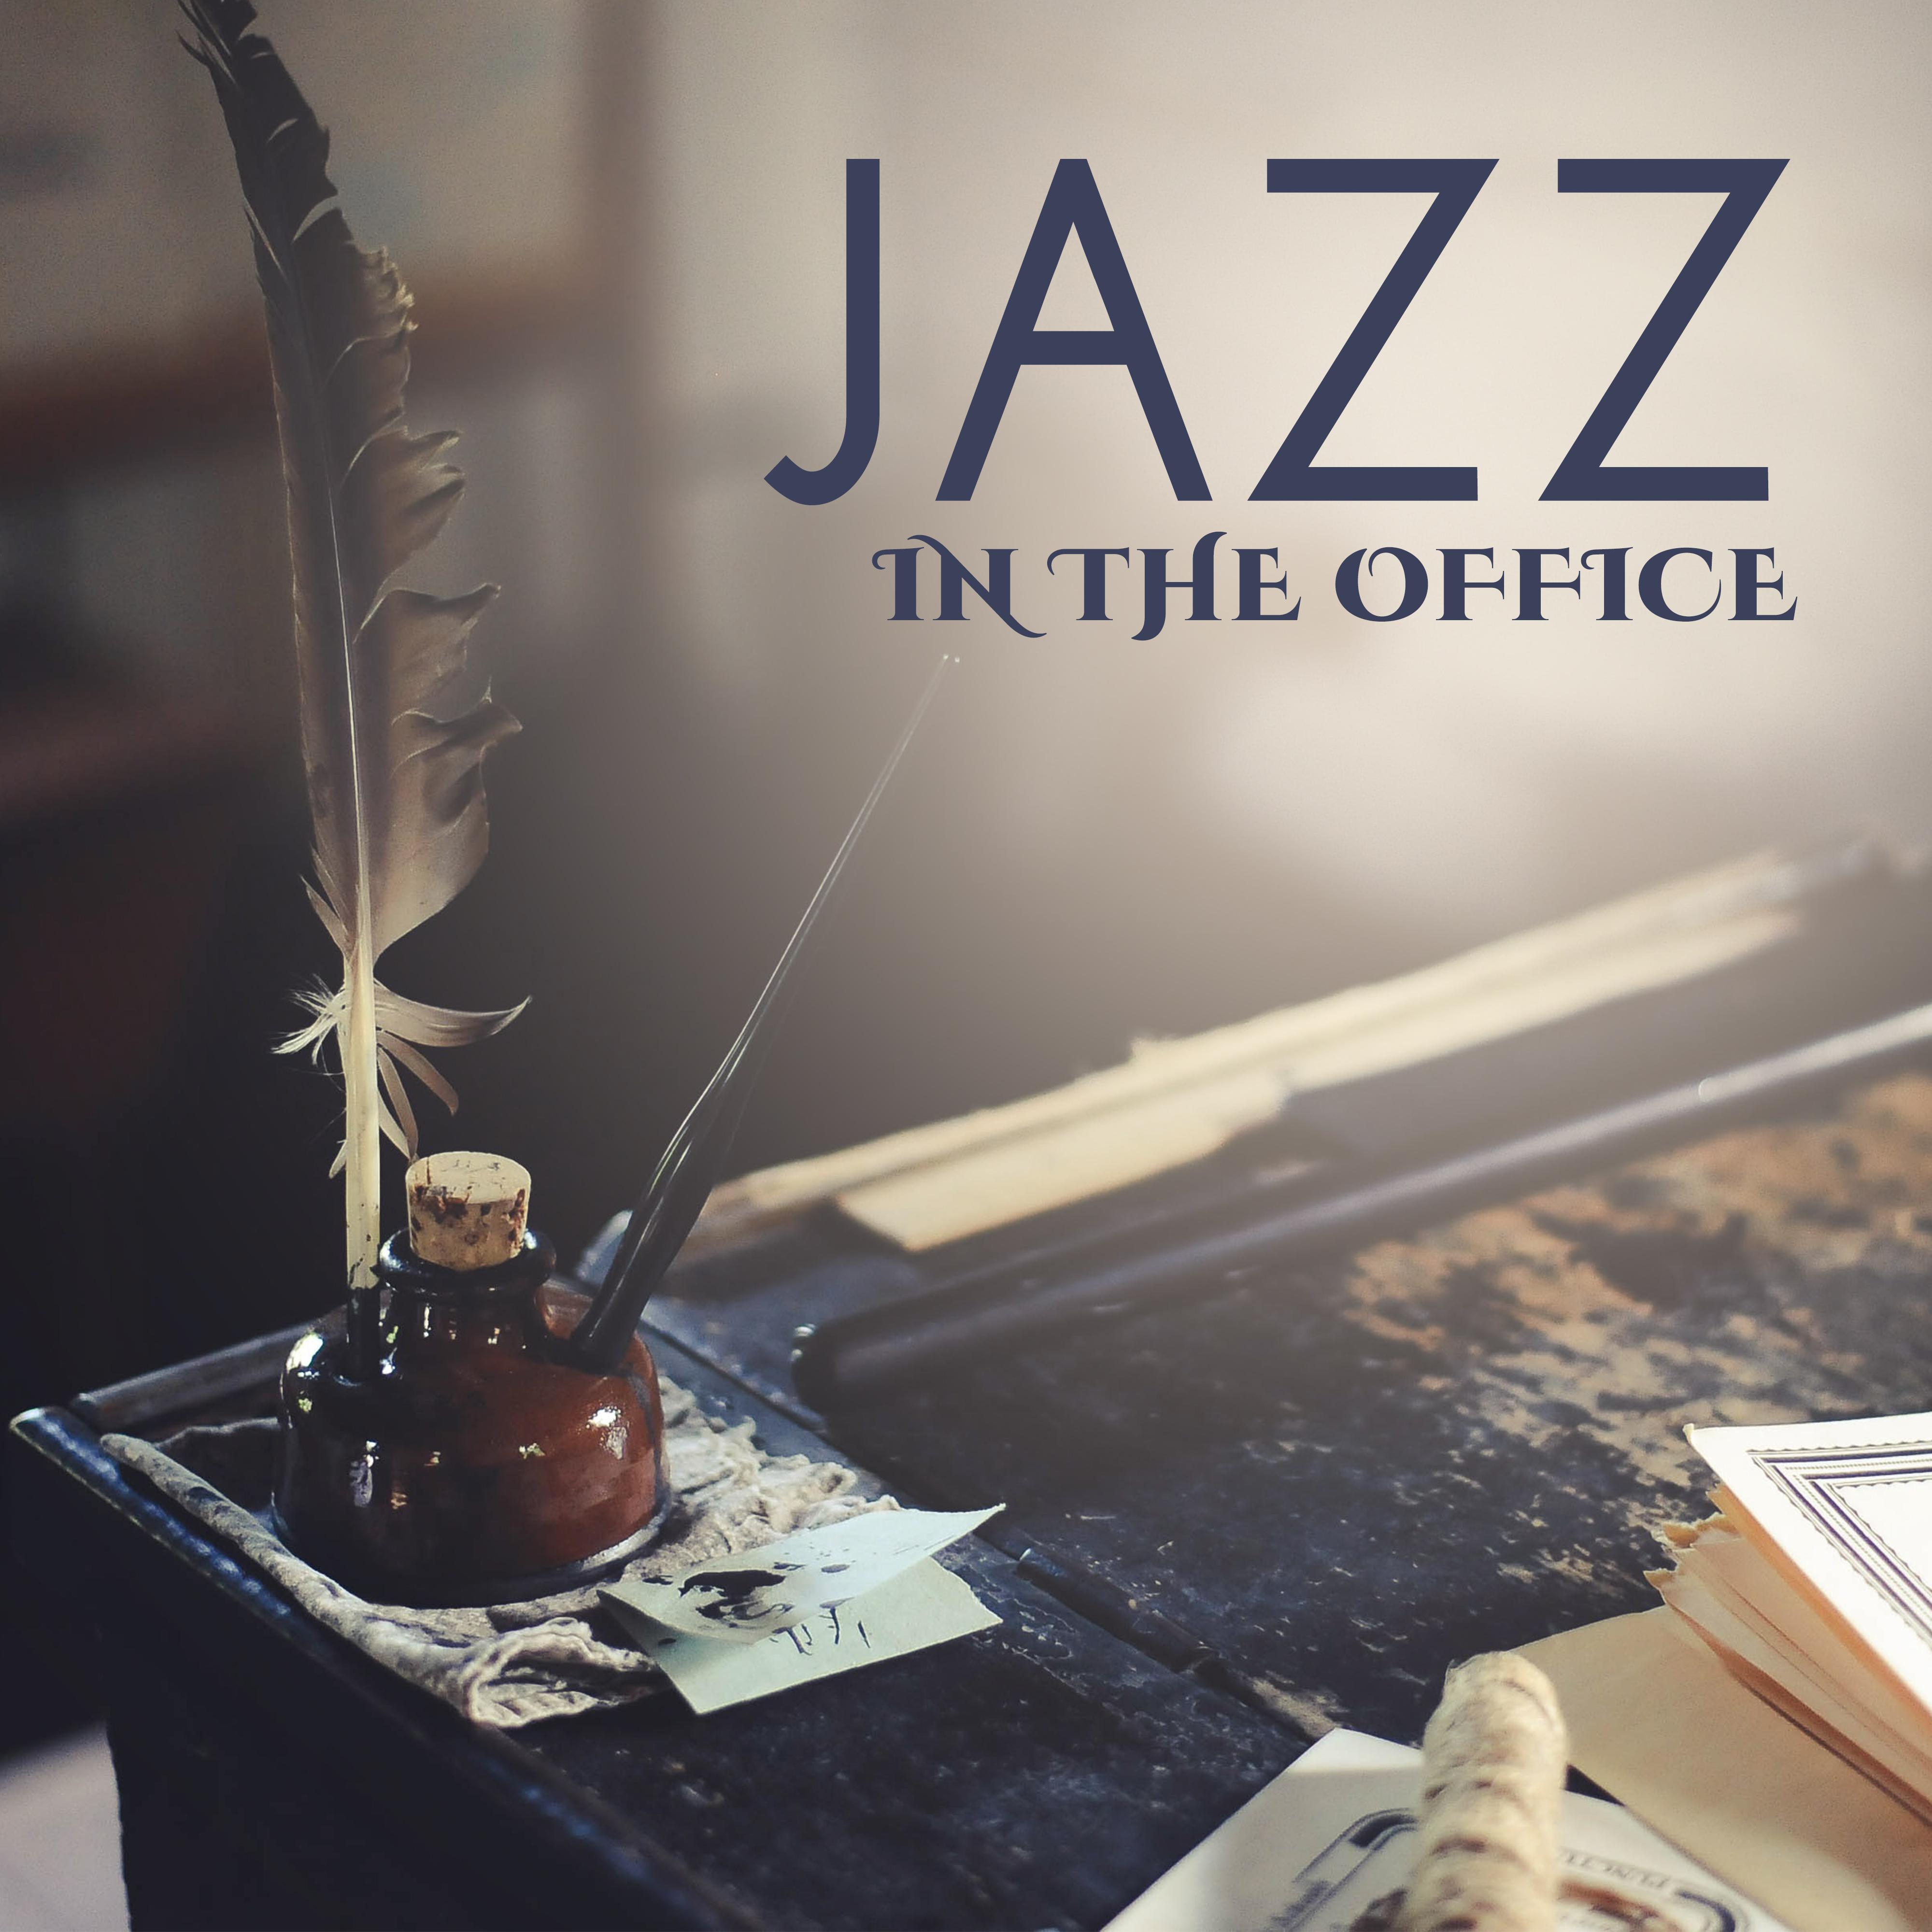 Jazz in the Office – Relaxing Jazz for Office, Mellow Jazz in the Background, Smooth Jazz, Instrumental